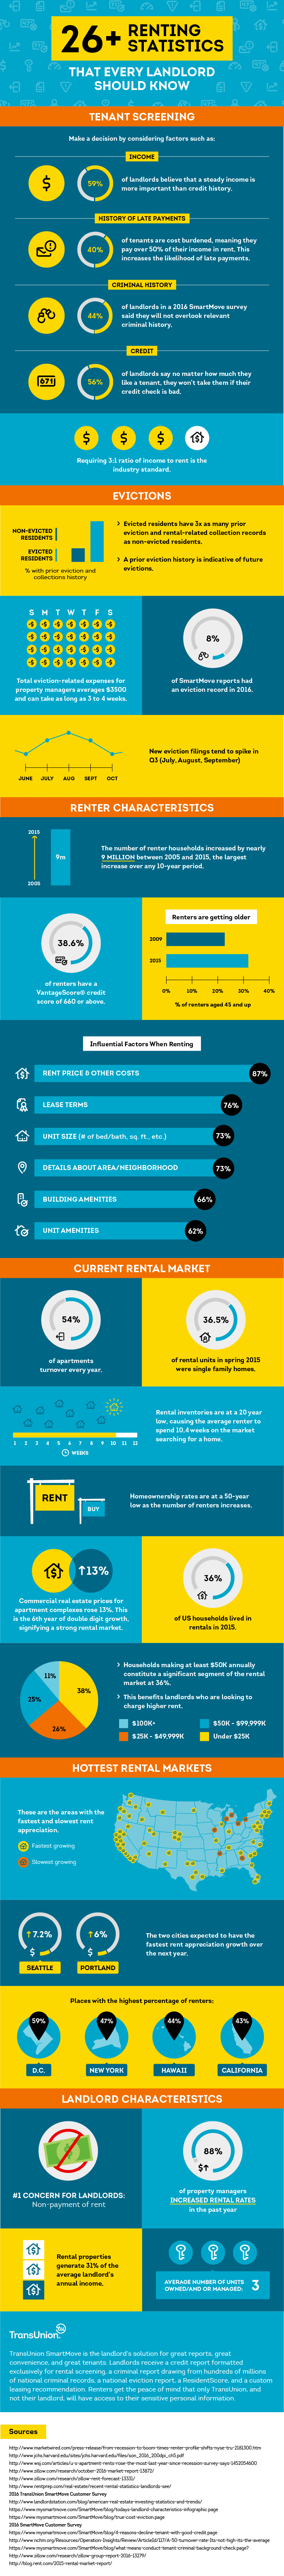 State Of The U.S. Rental Market in 2016 [INFOGRAPHIC] 